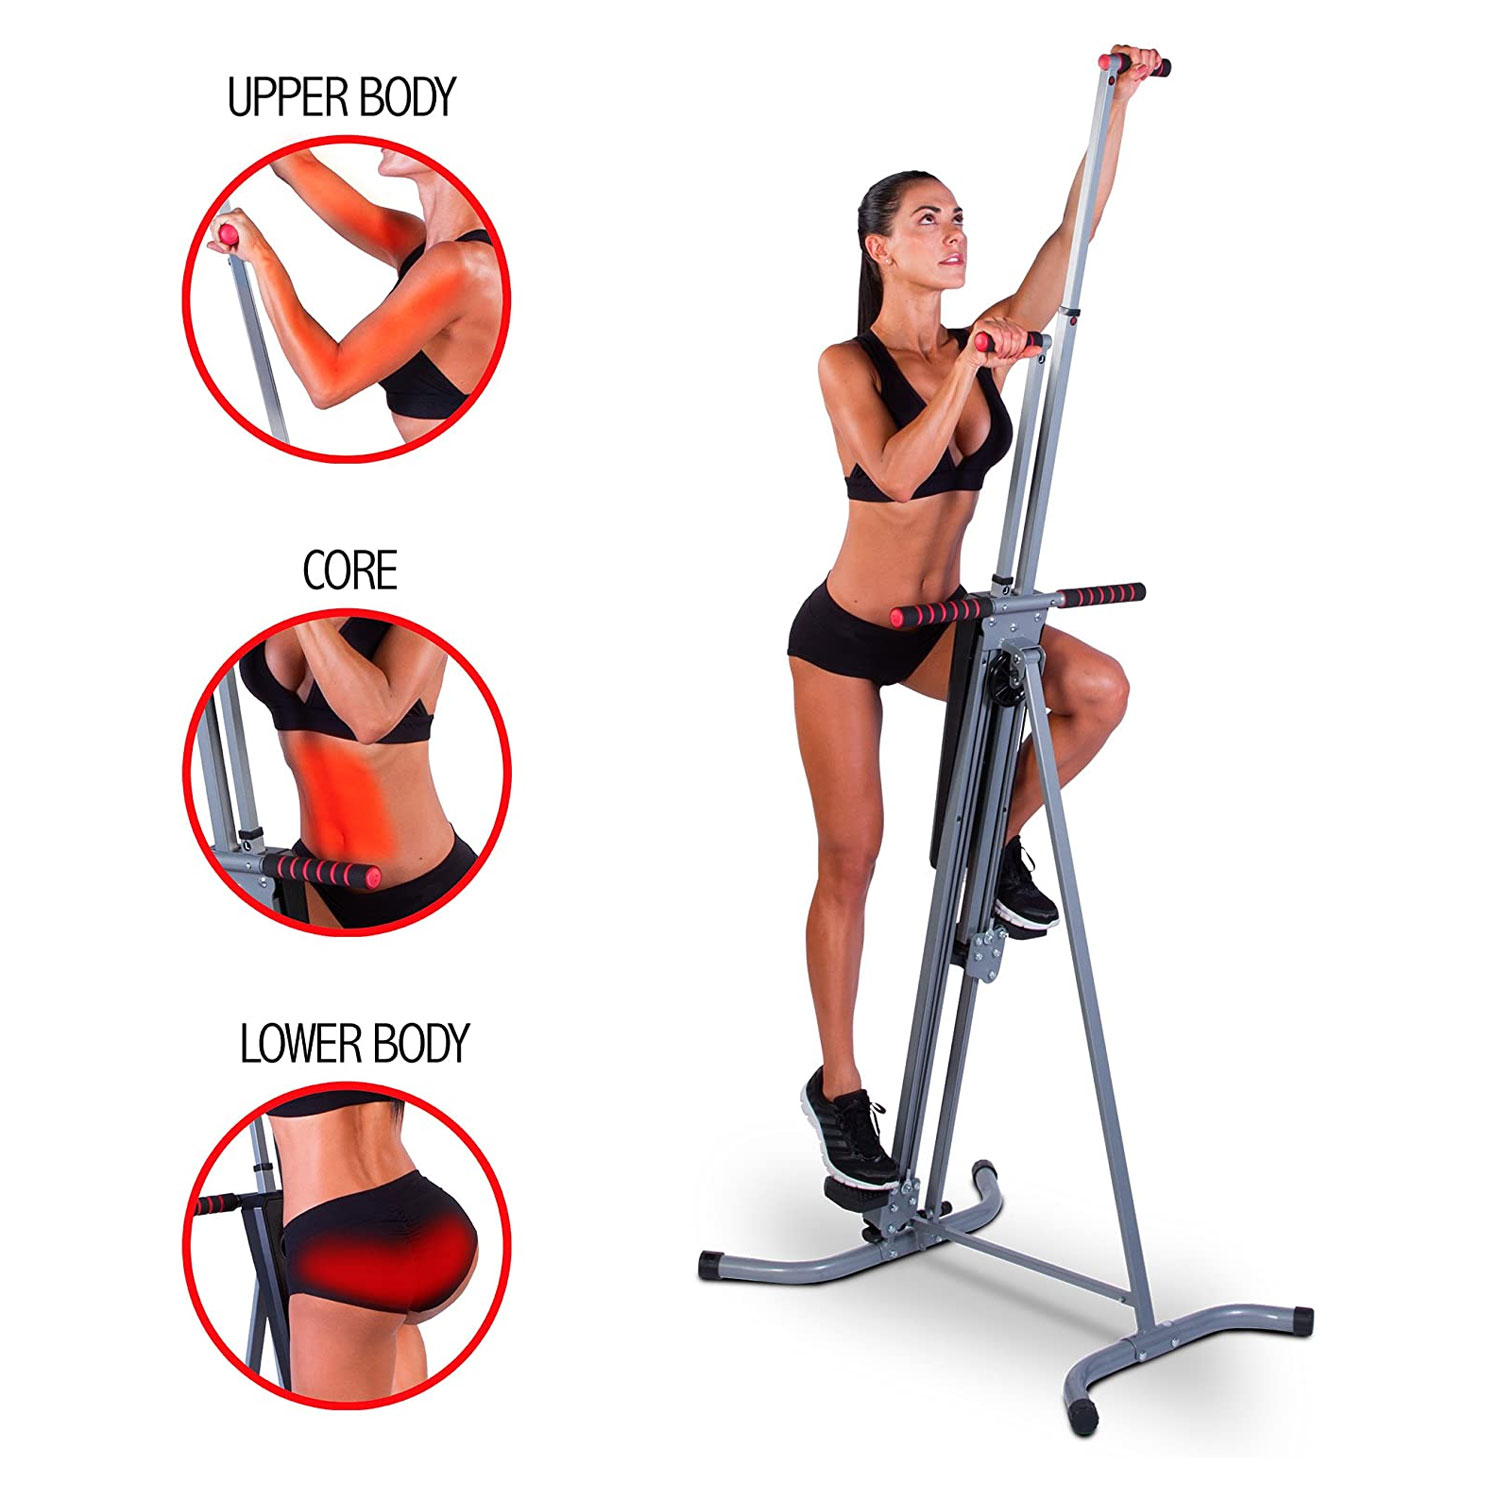 MaxiClimber Classic Vertical Resistance Climber and Cardio Exercise System - image 3 of 8